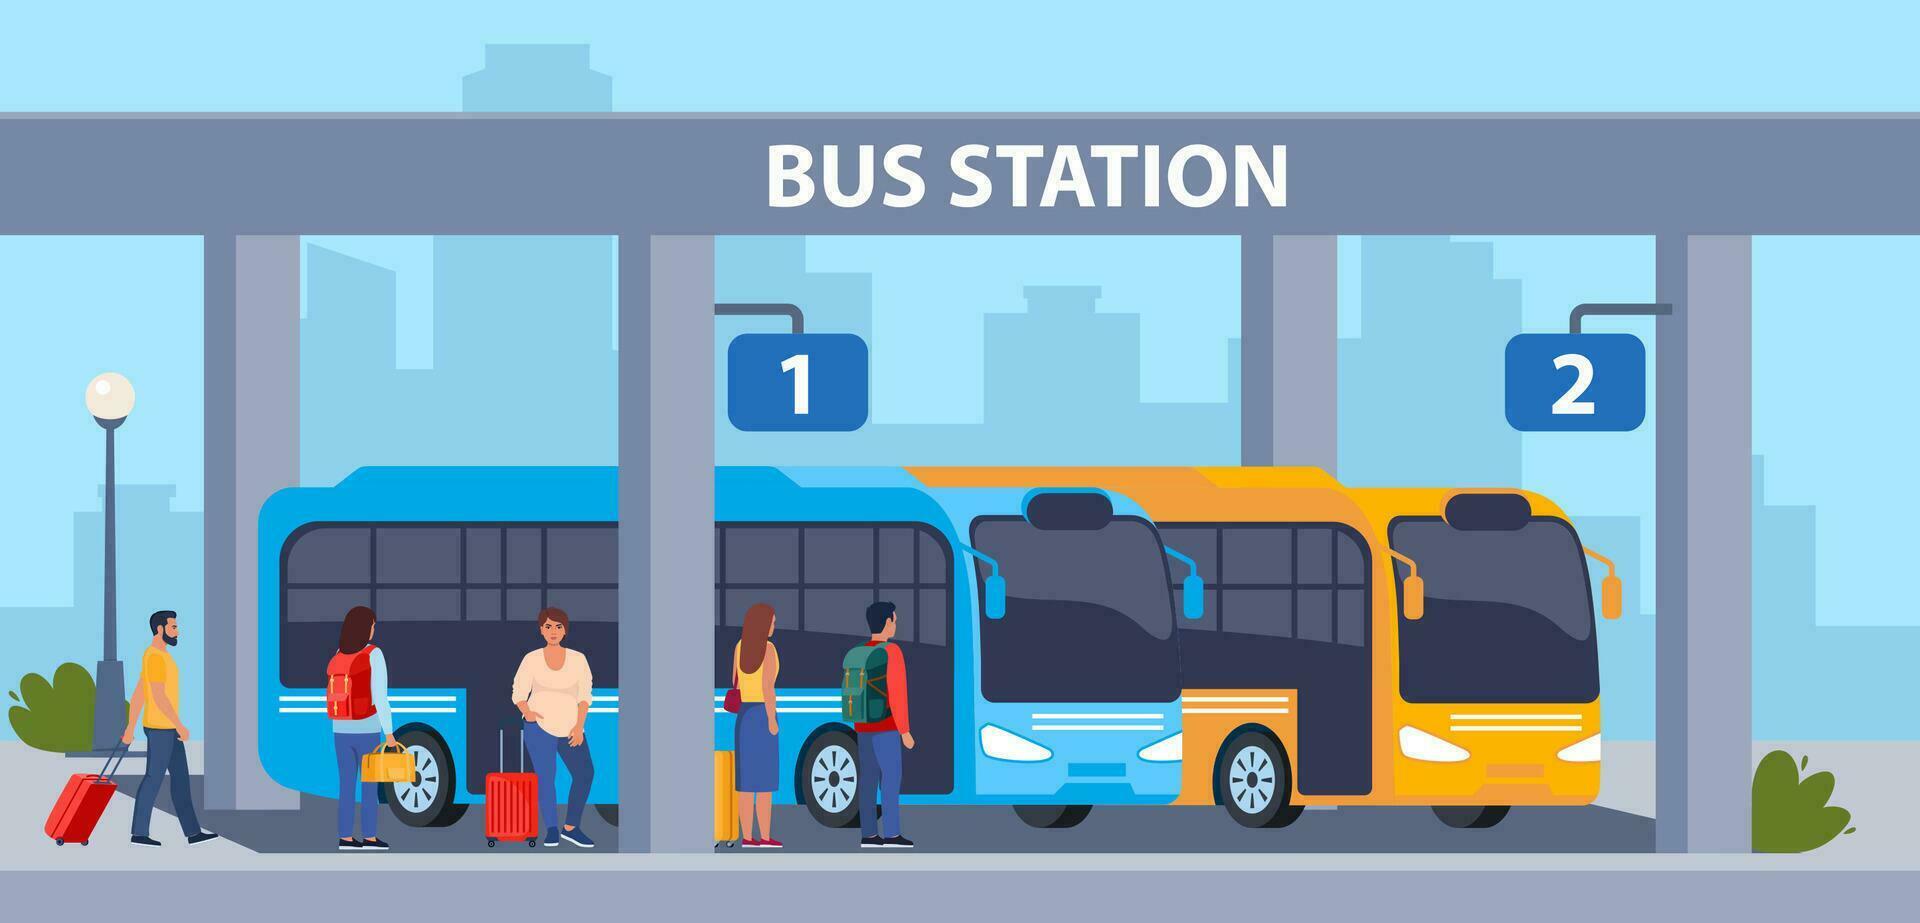 People on auto station. Man, woman standing near transport, waiting for passenger boarding. Citizen, urban infrastructure concept. Vector illustration.